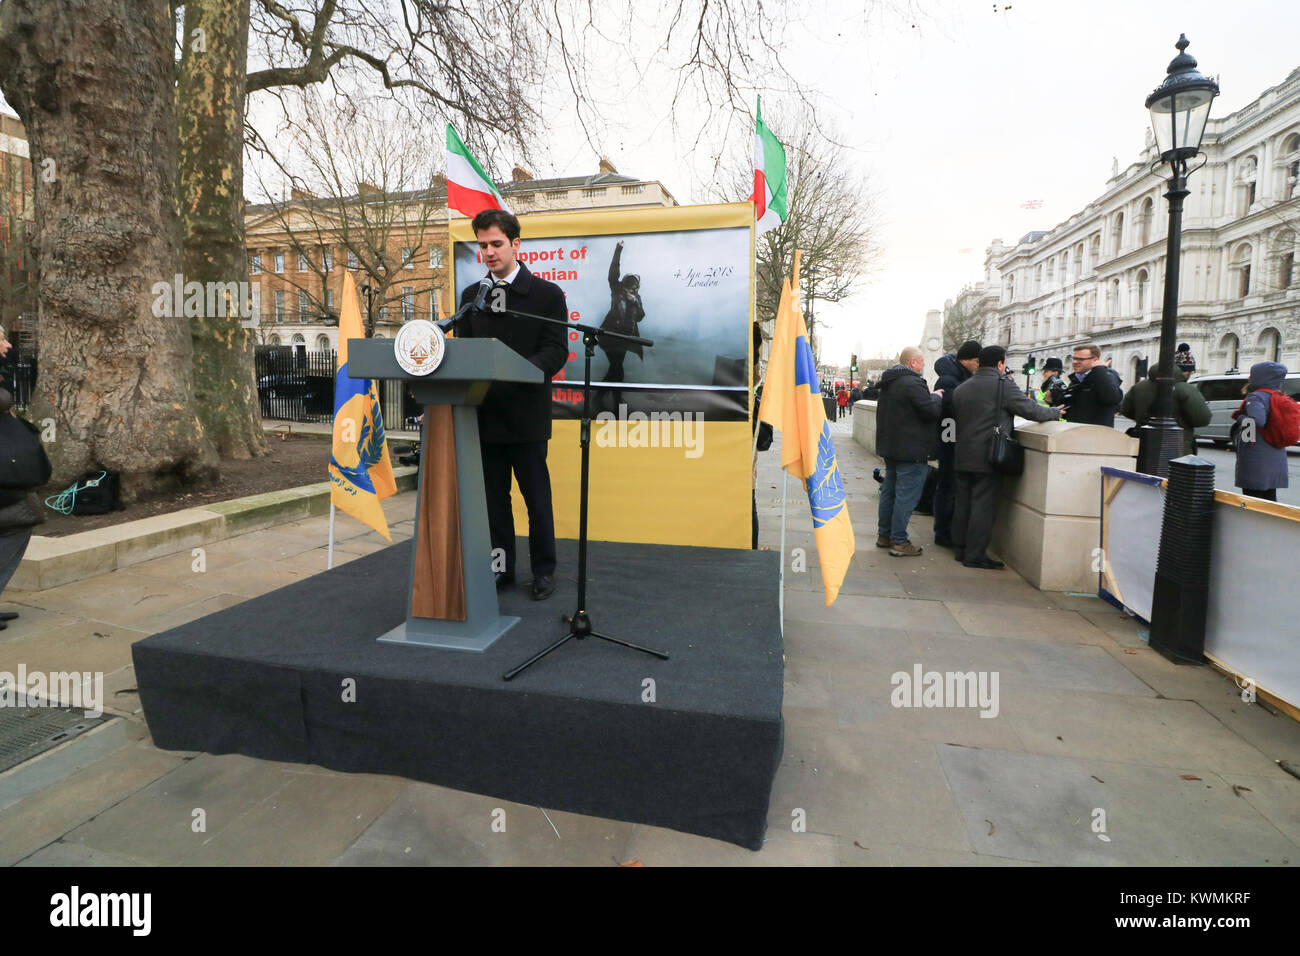 London, UK. 4th Jan, 2018. A rally outside No 10 Downing Street by members of Iran's opposition, the National Resistance of Iran (NCRI) and the People's Mojahedin Organization of Iran (PMOI/MEK)calling on the UK Government to break its silence and condemn the killings and crackdown of protesters by the Iranian clerical regime of President Rouhani and Supreme leader Ayatollah Ali Khamenei Credit: amer ghazzal/Alamy Live News Stock Photo